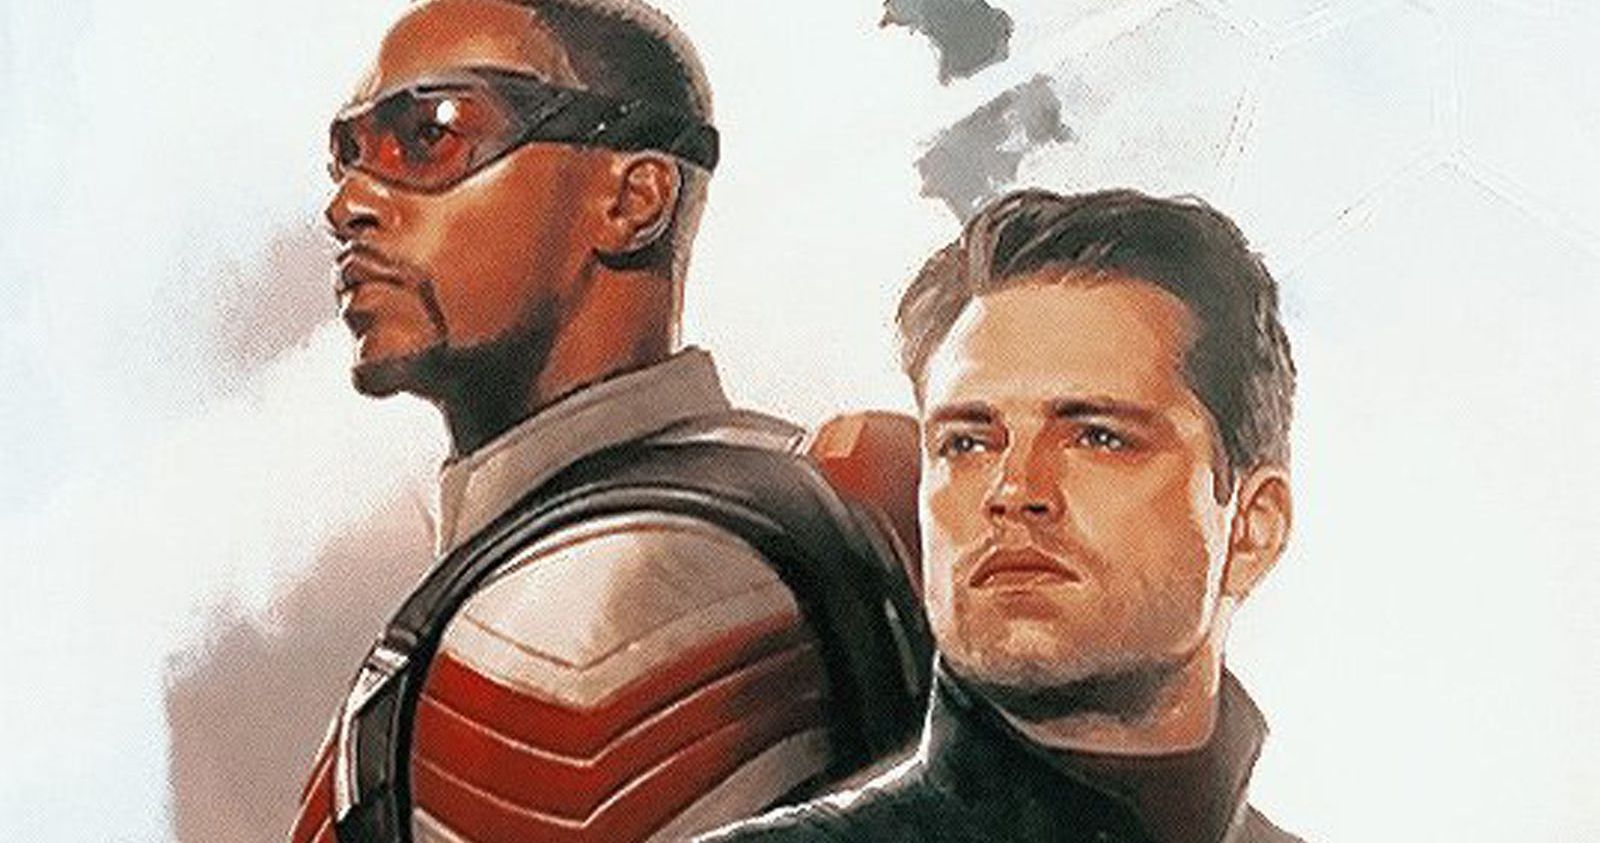 Disney+'s The Falcon and the Winter Soldier Production Halts Over Coronavirus Concerns